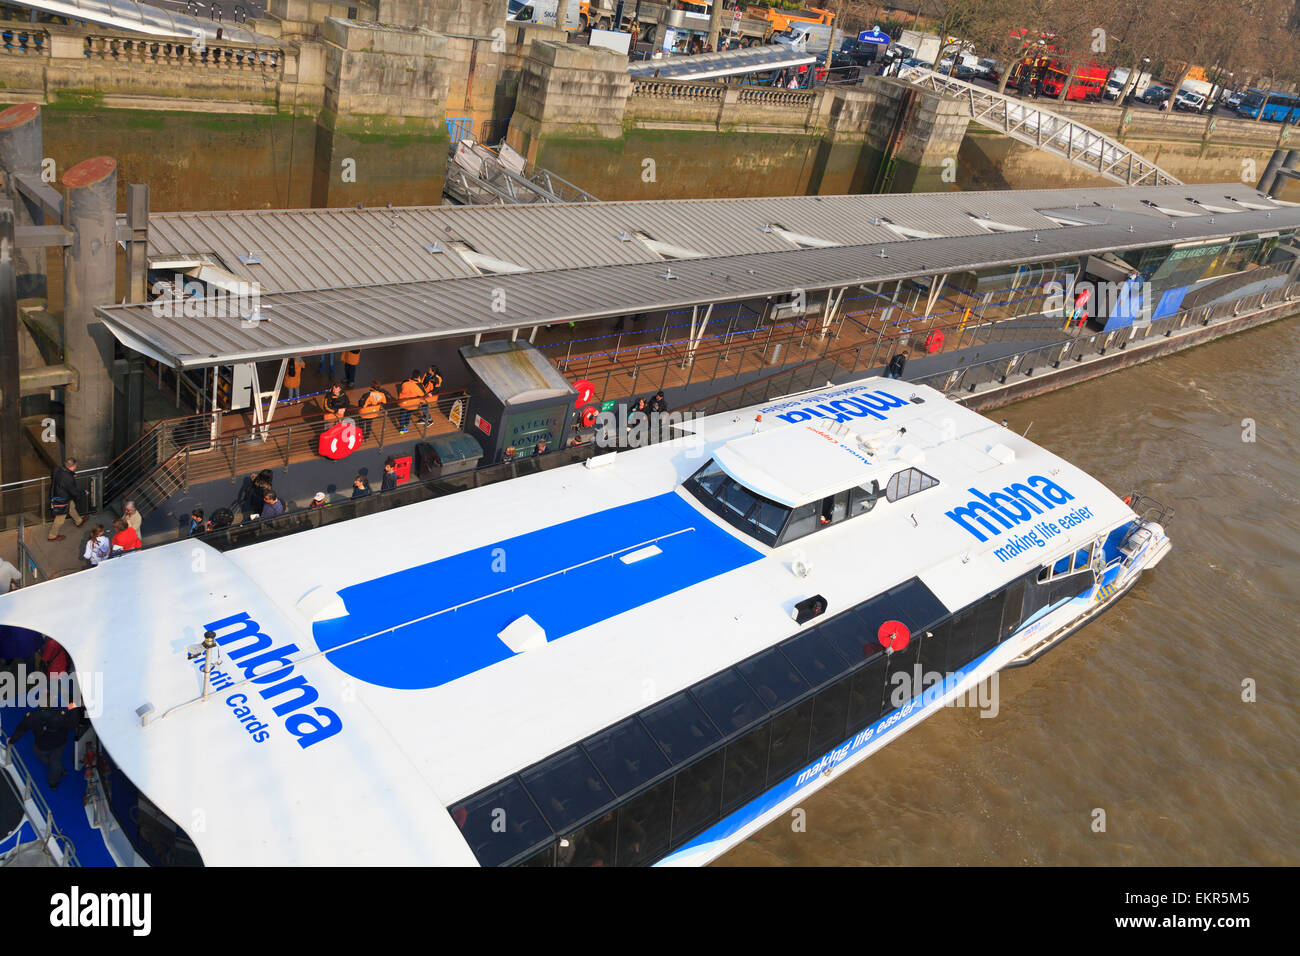 Looking down on am MBNA river cruiser moored on the embankment pier of the Thames in london Stock Photo